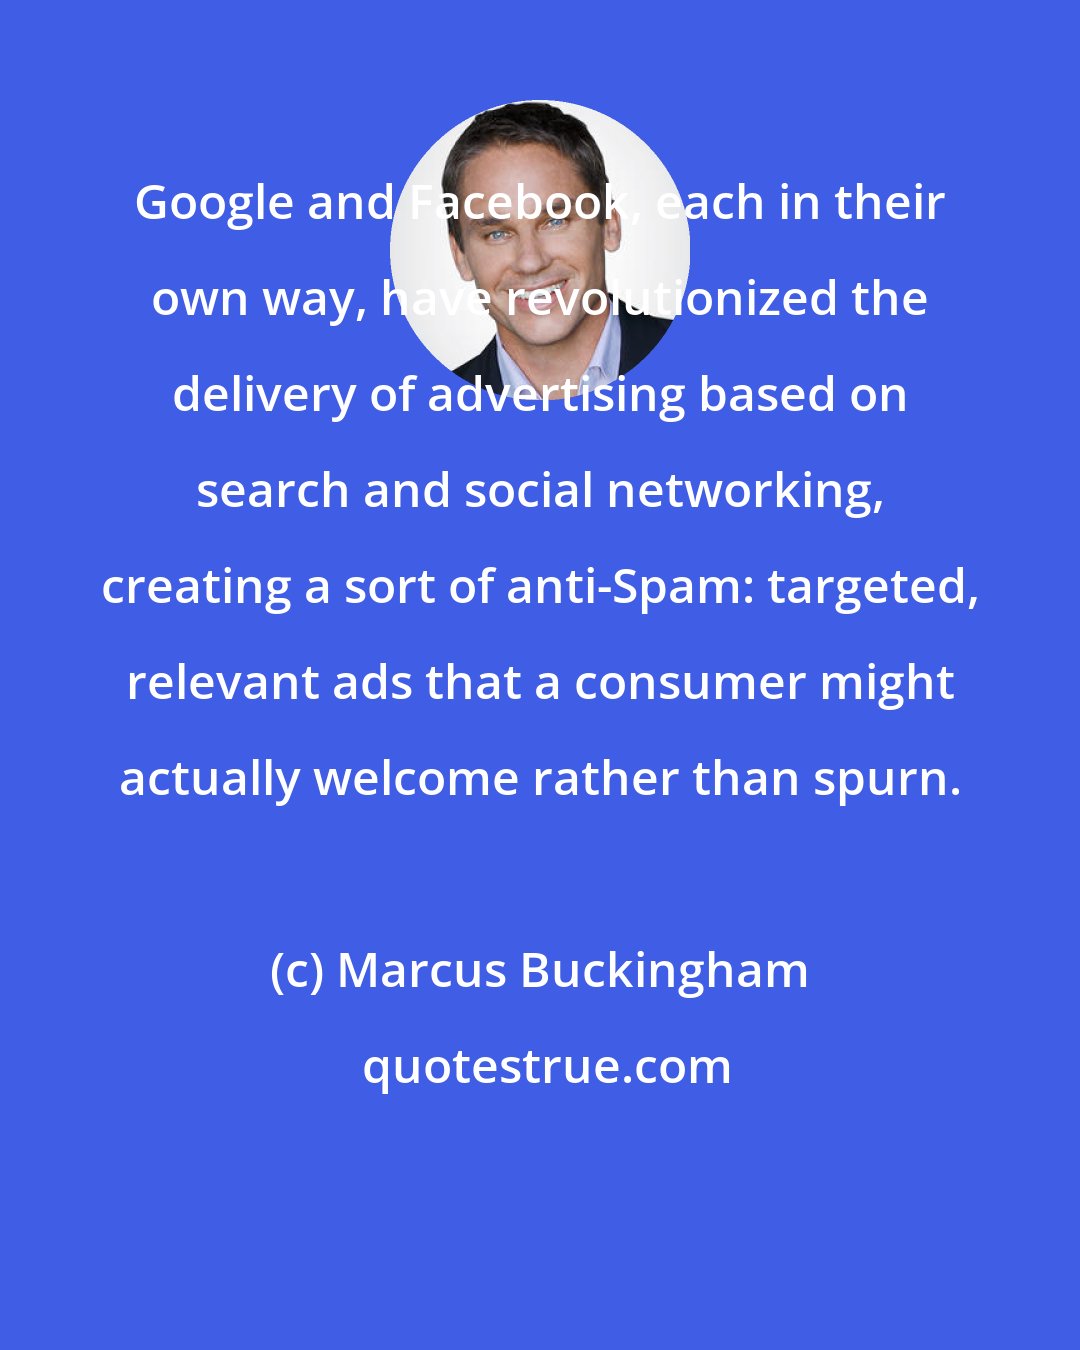 Marcus Buckingham: Google and Facebook, each in their own way, have revolutionized the delivery of advertising based on search and social networking, creating a sort of anti-Spam: targeted, relevant ads that a consumer might actually welcome rather than spurn.